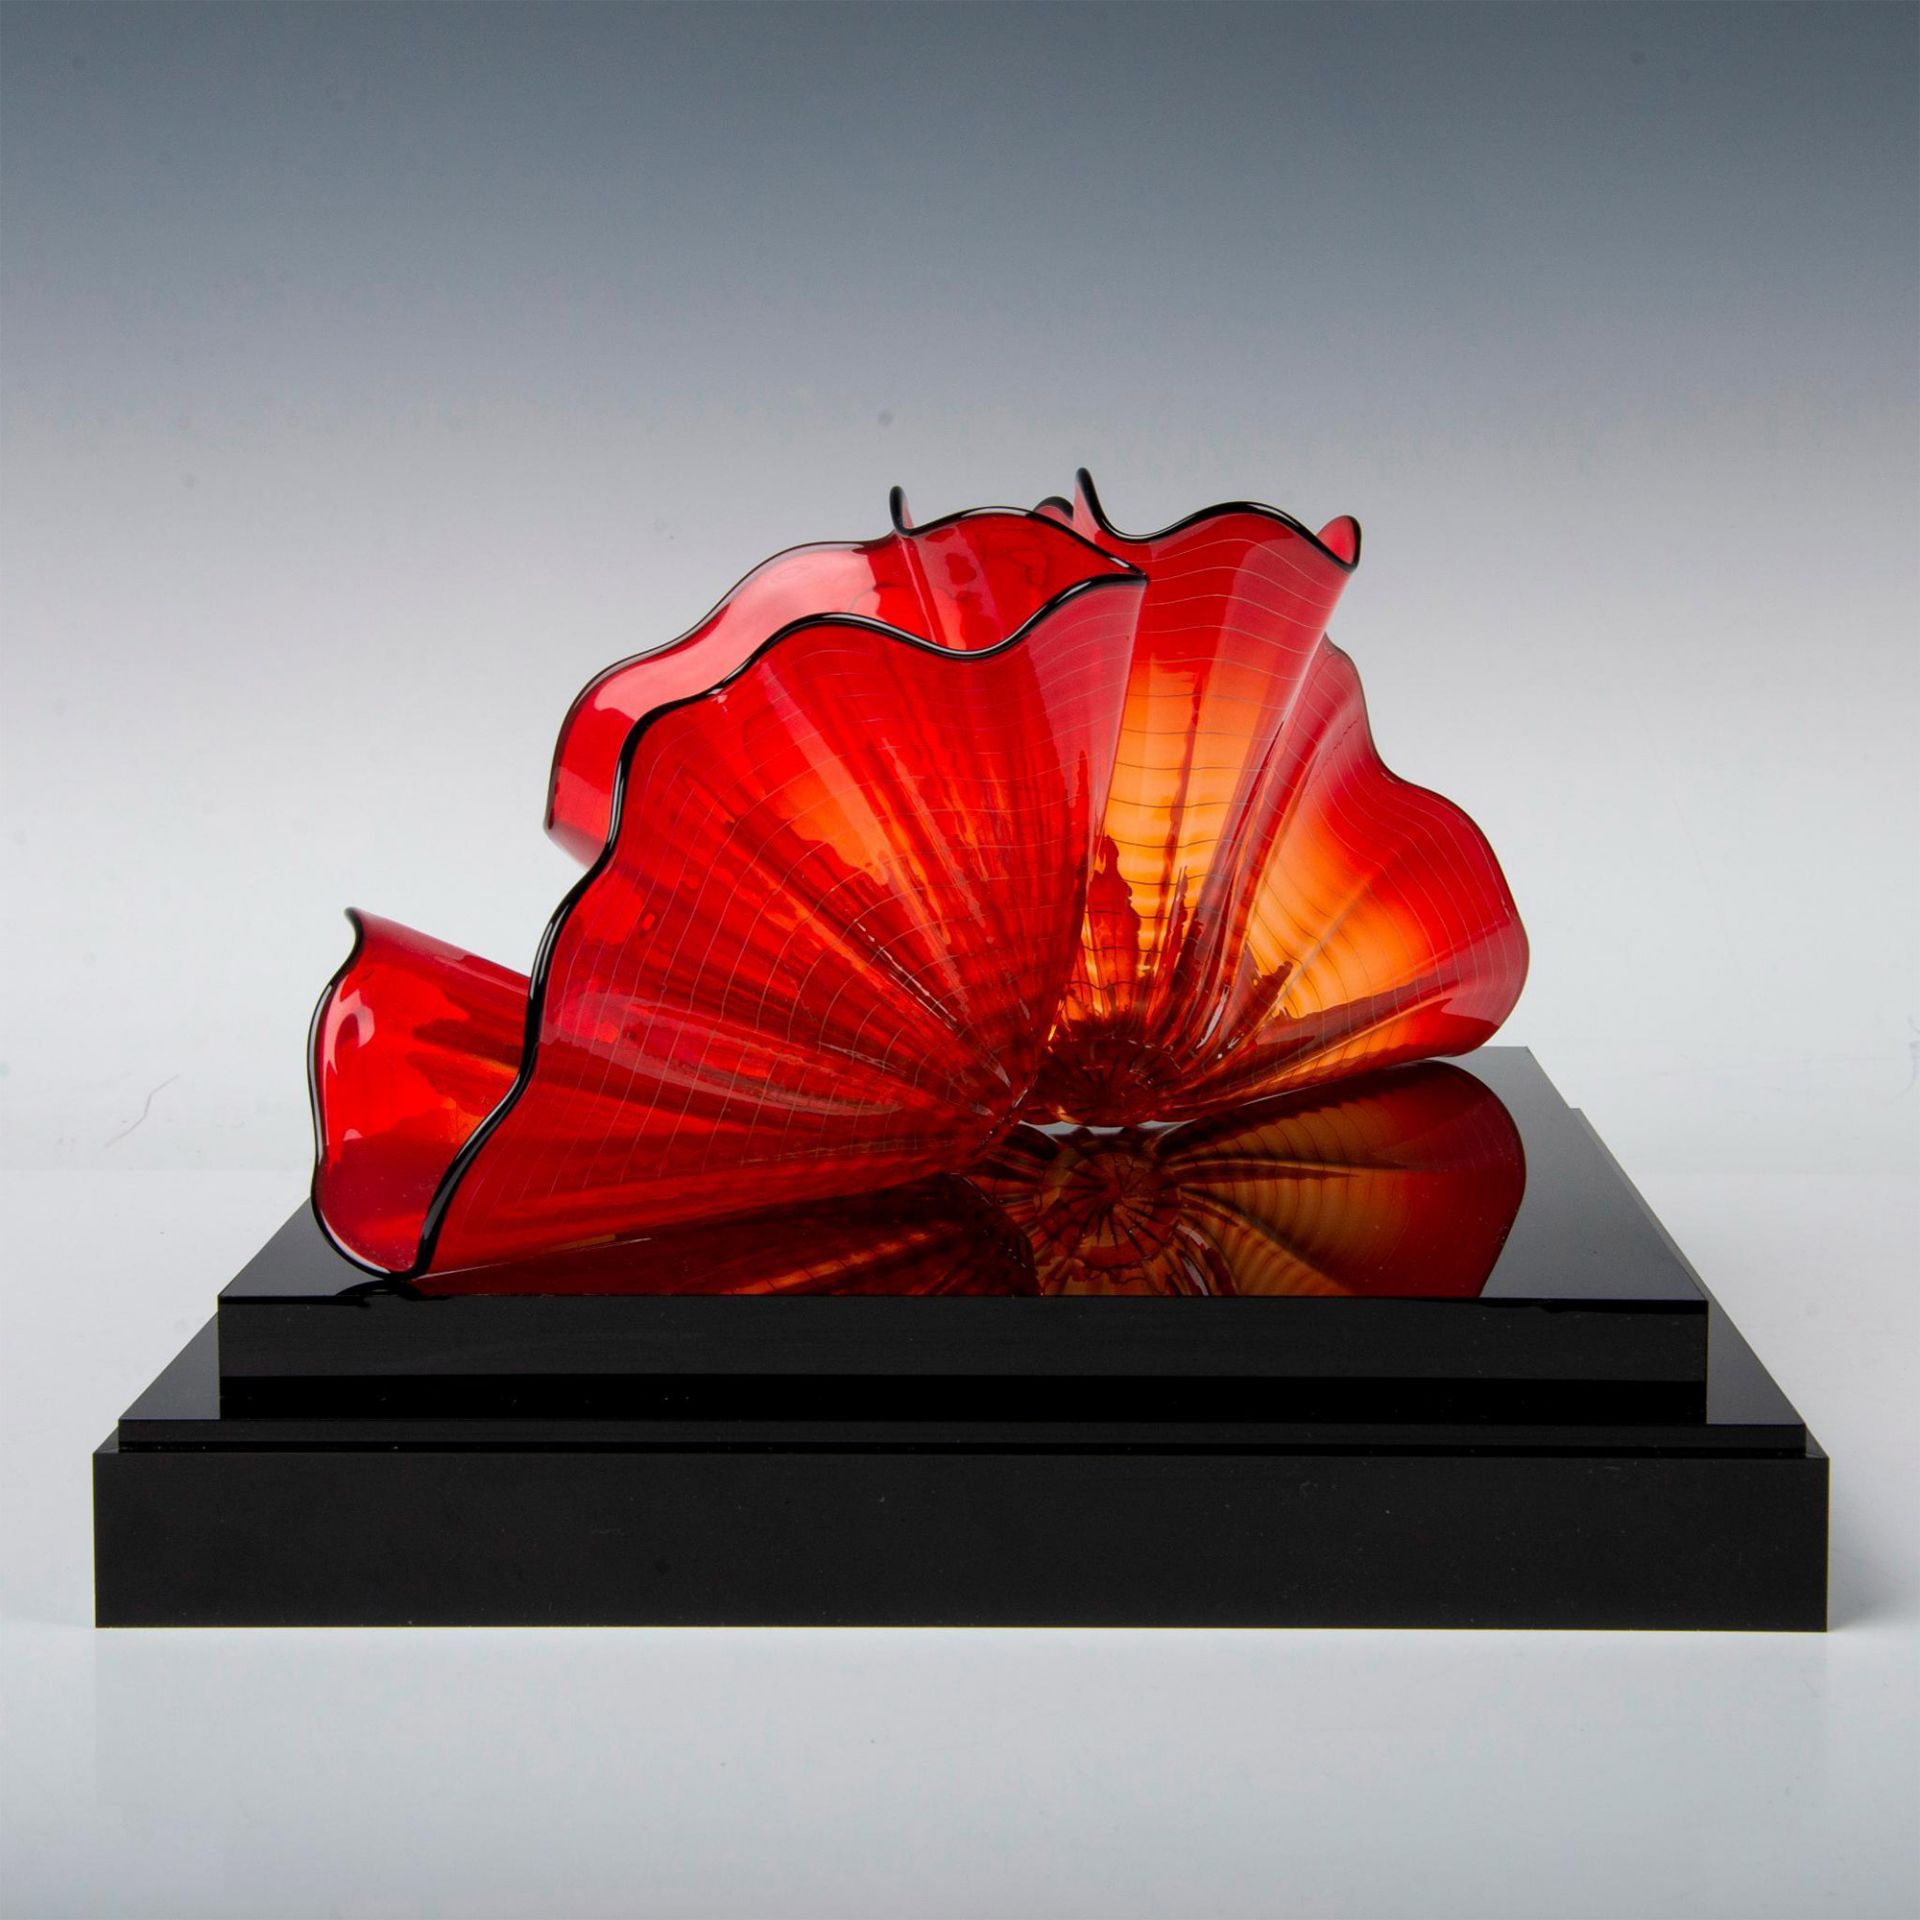 Dale Chihuly Portland Press Art Glass, Red Amber Persian Pair - Image 10 of 20